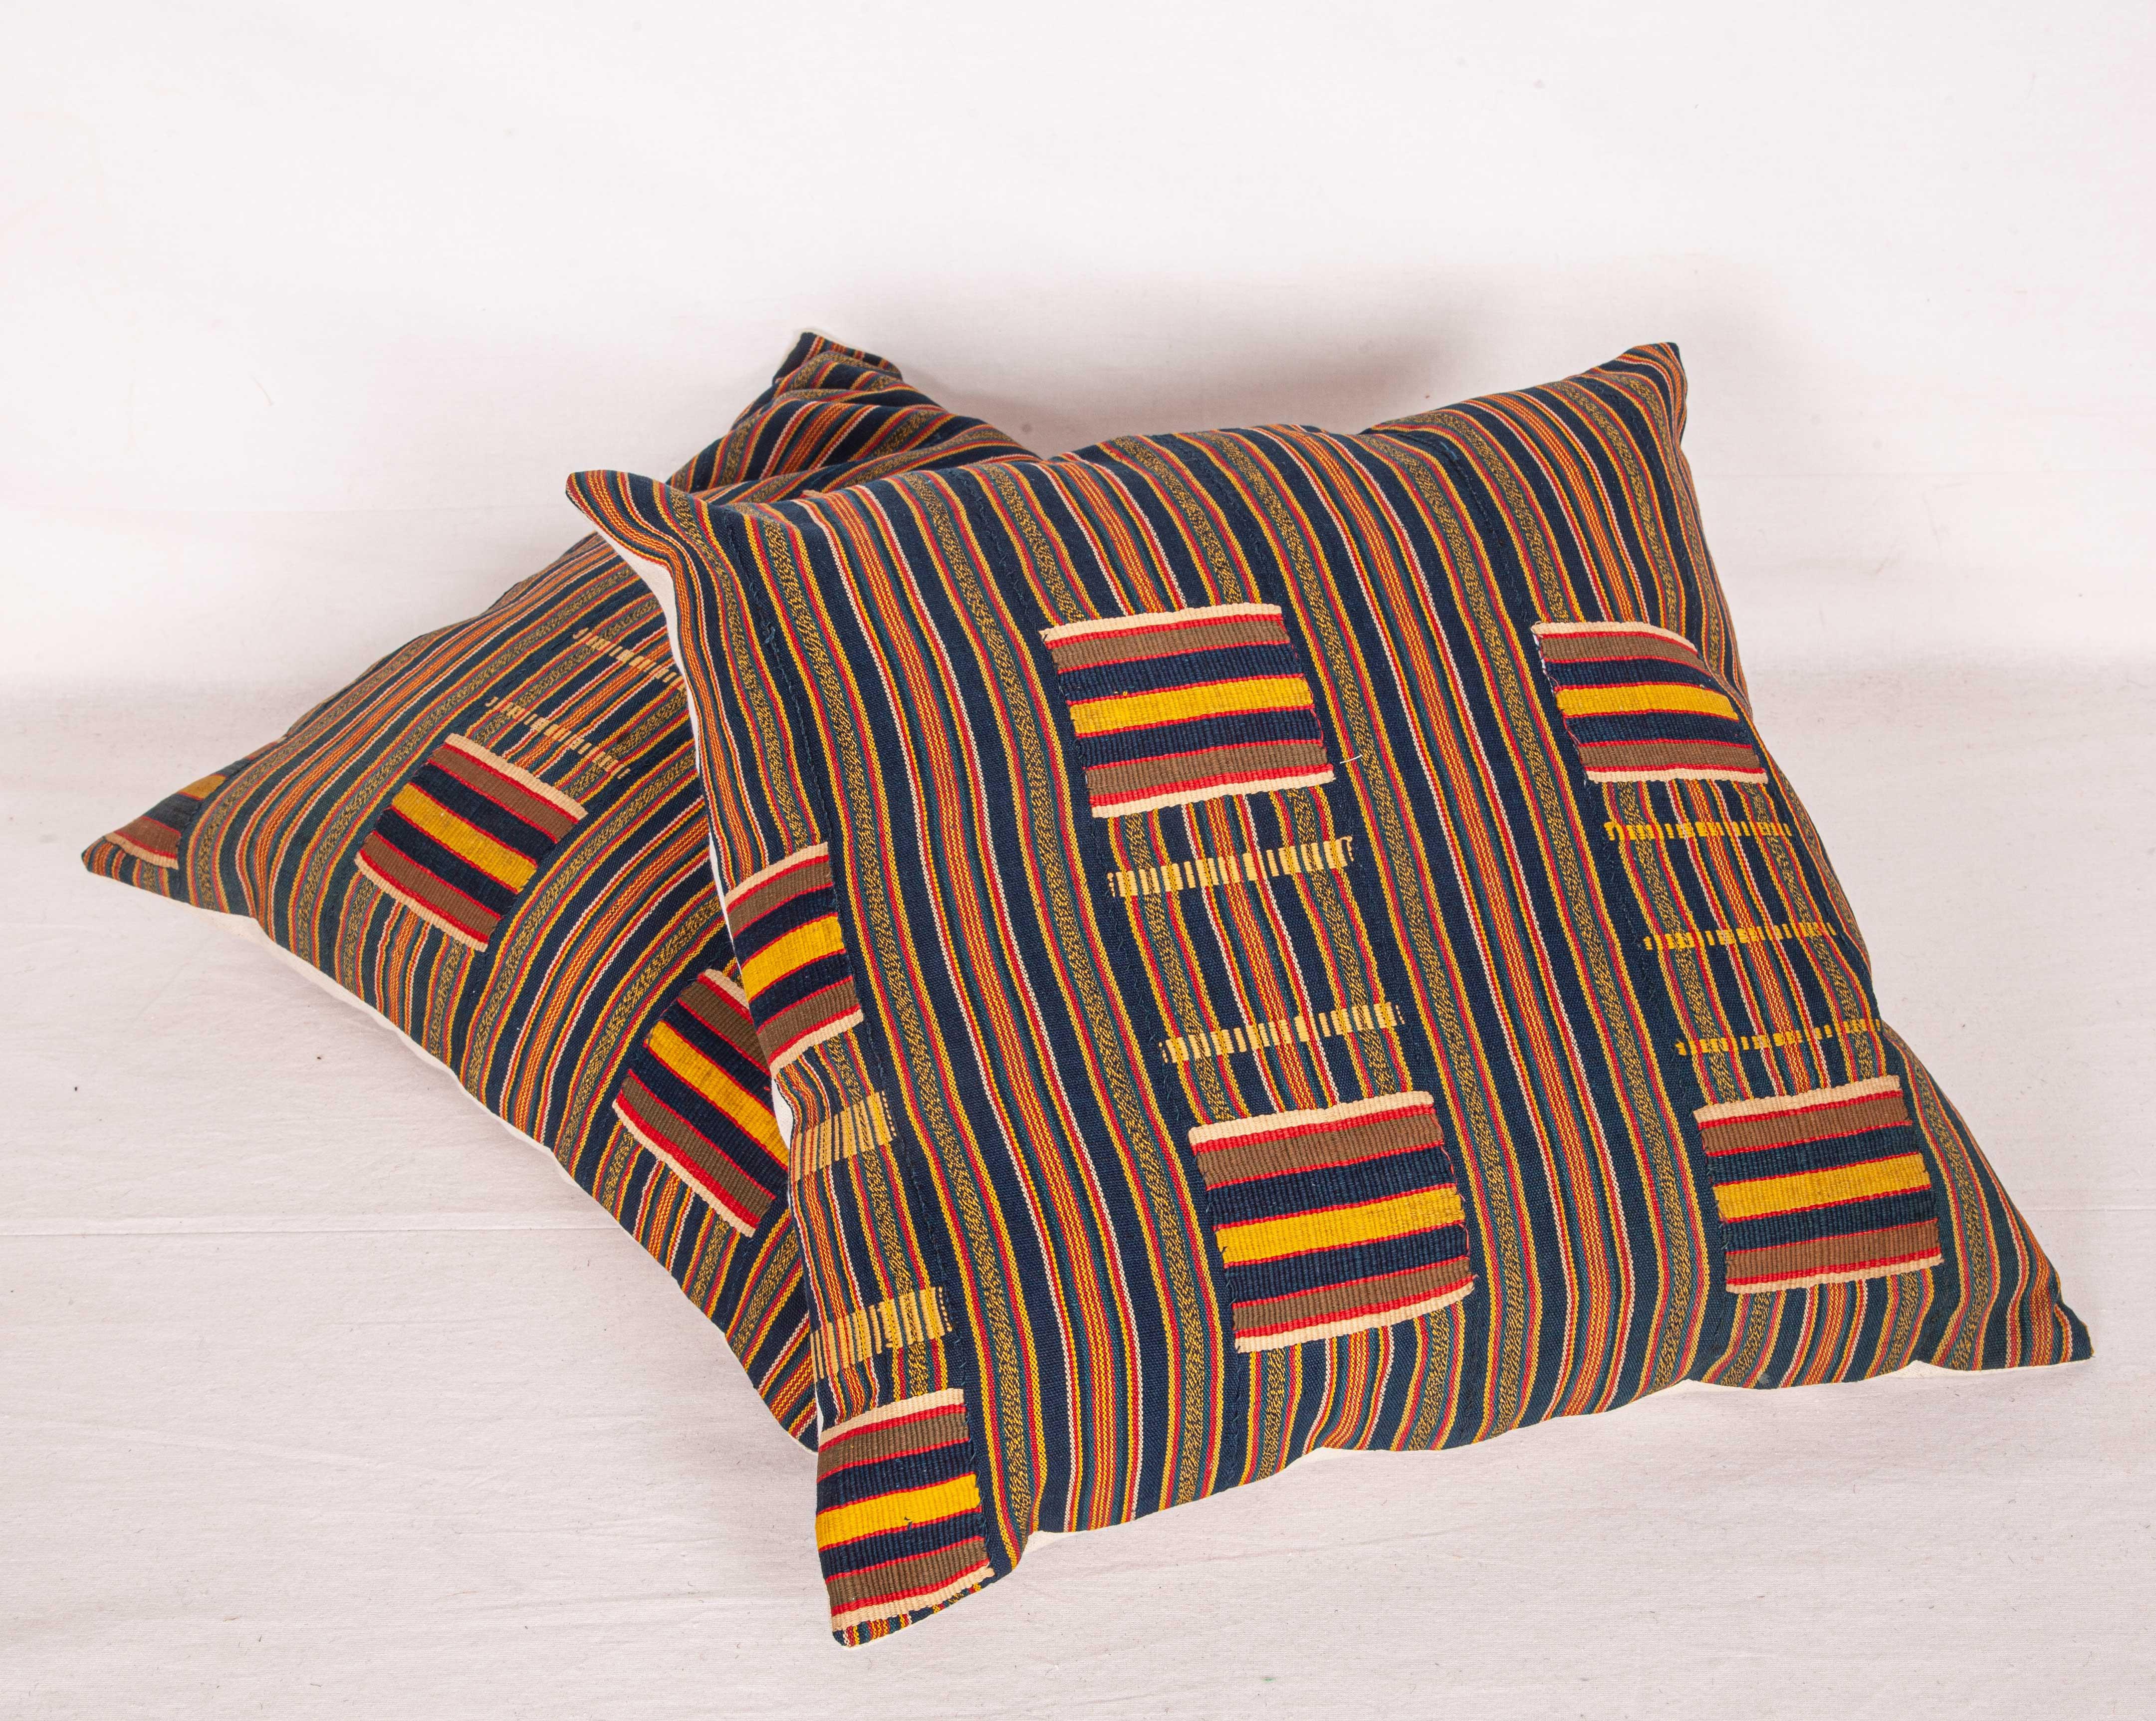 Hand-Woven Pillow Cases Fashioned from African Kente Cloth, First Half of the 20th Century